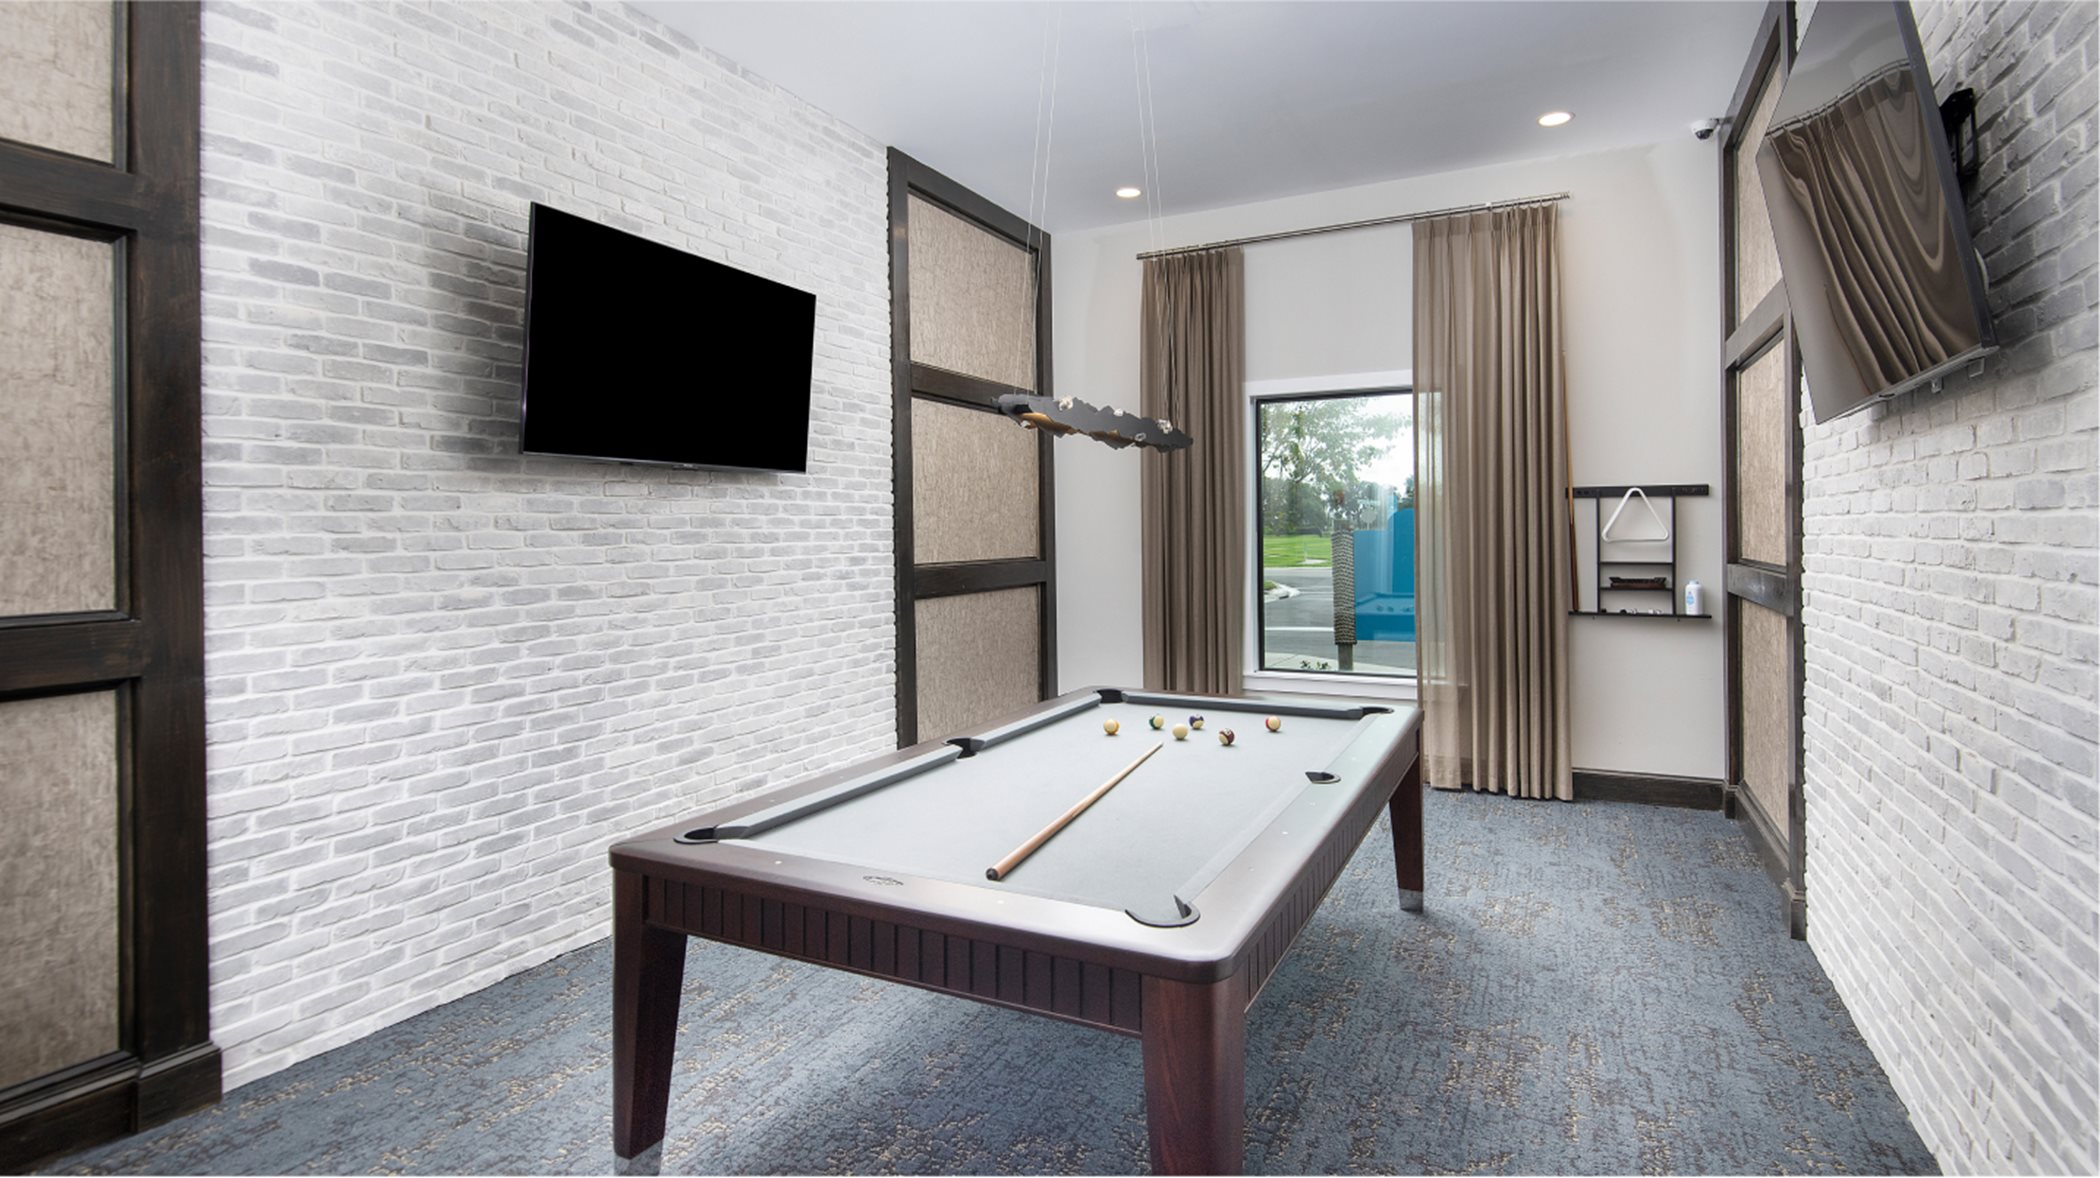 Clubhouse pool room